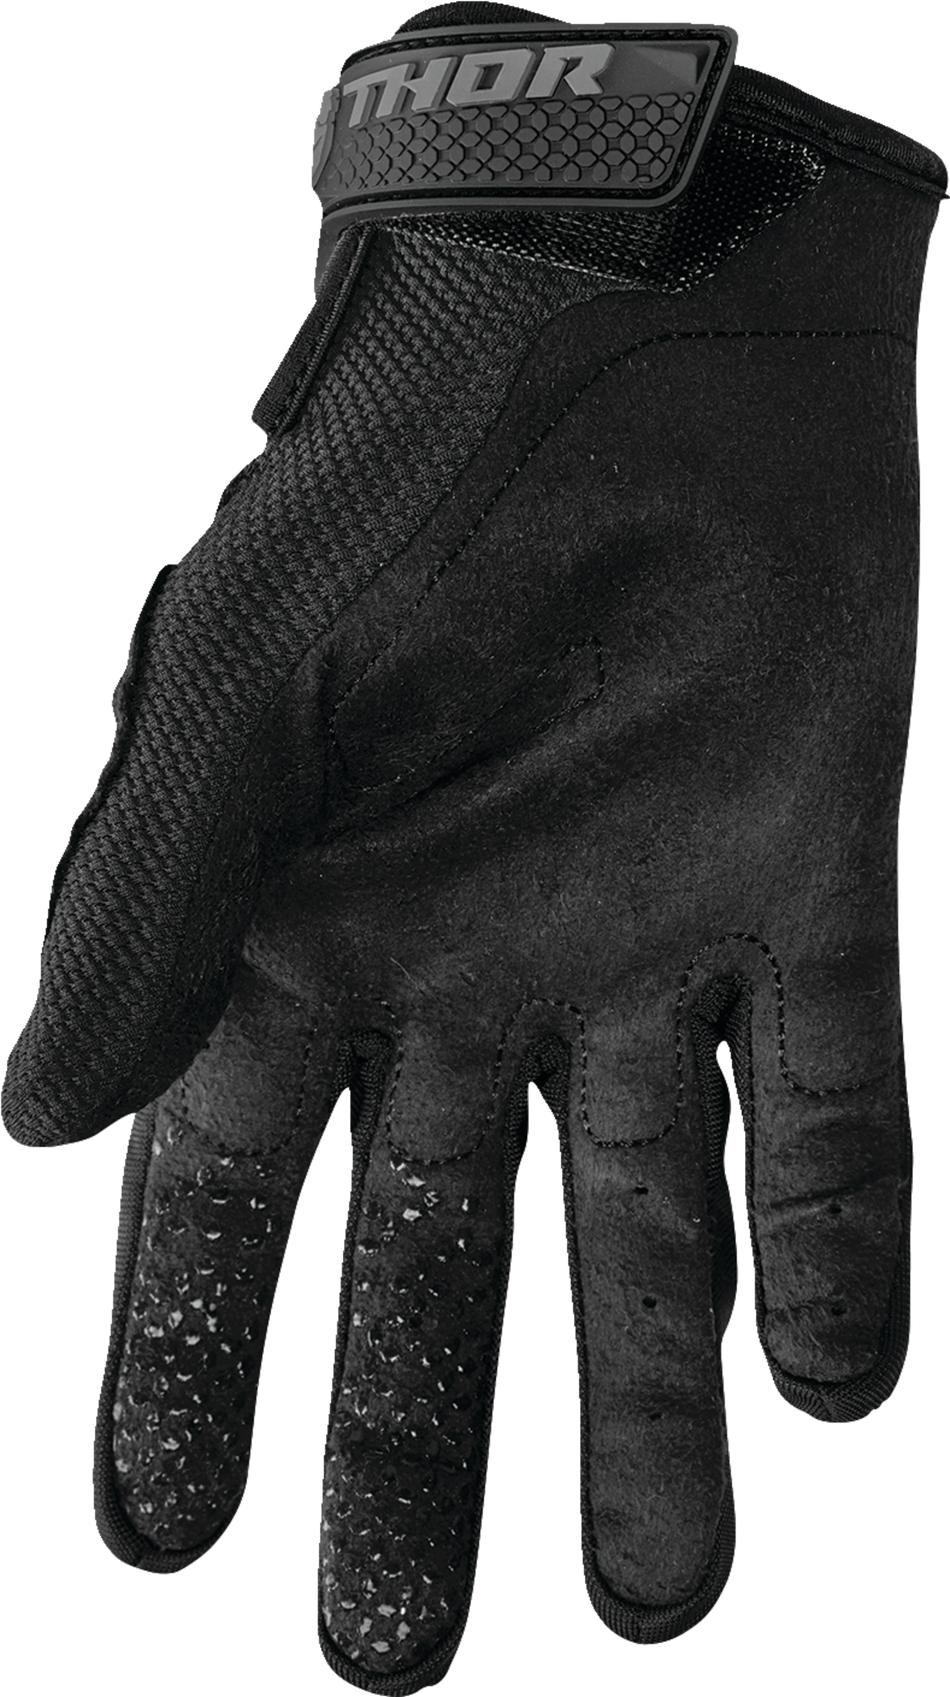 THOR Sector Gloves - Black/Gray - Small 3330-7250